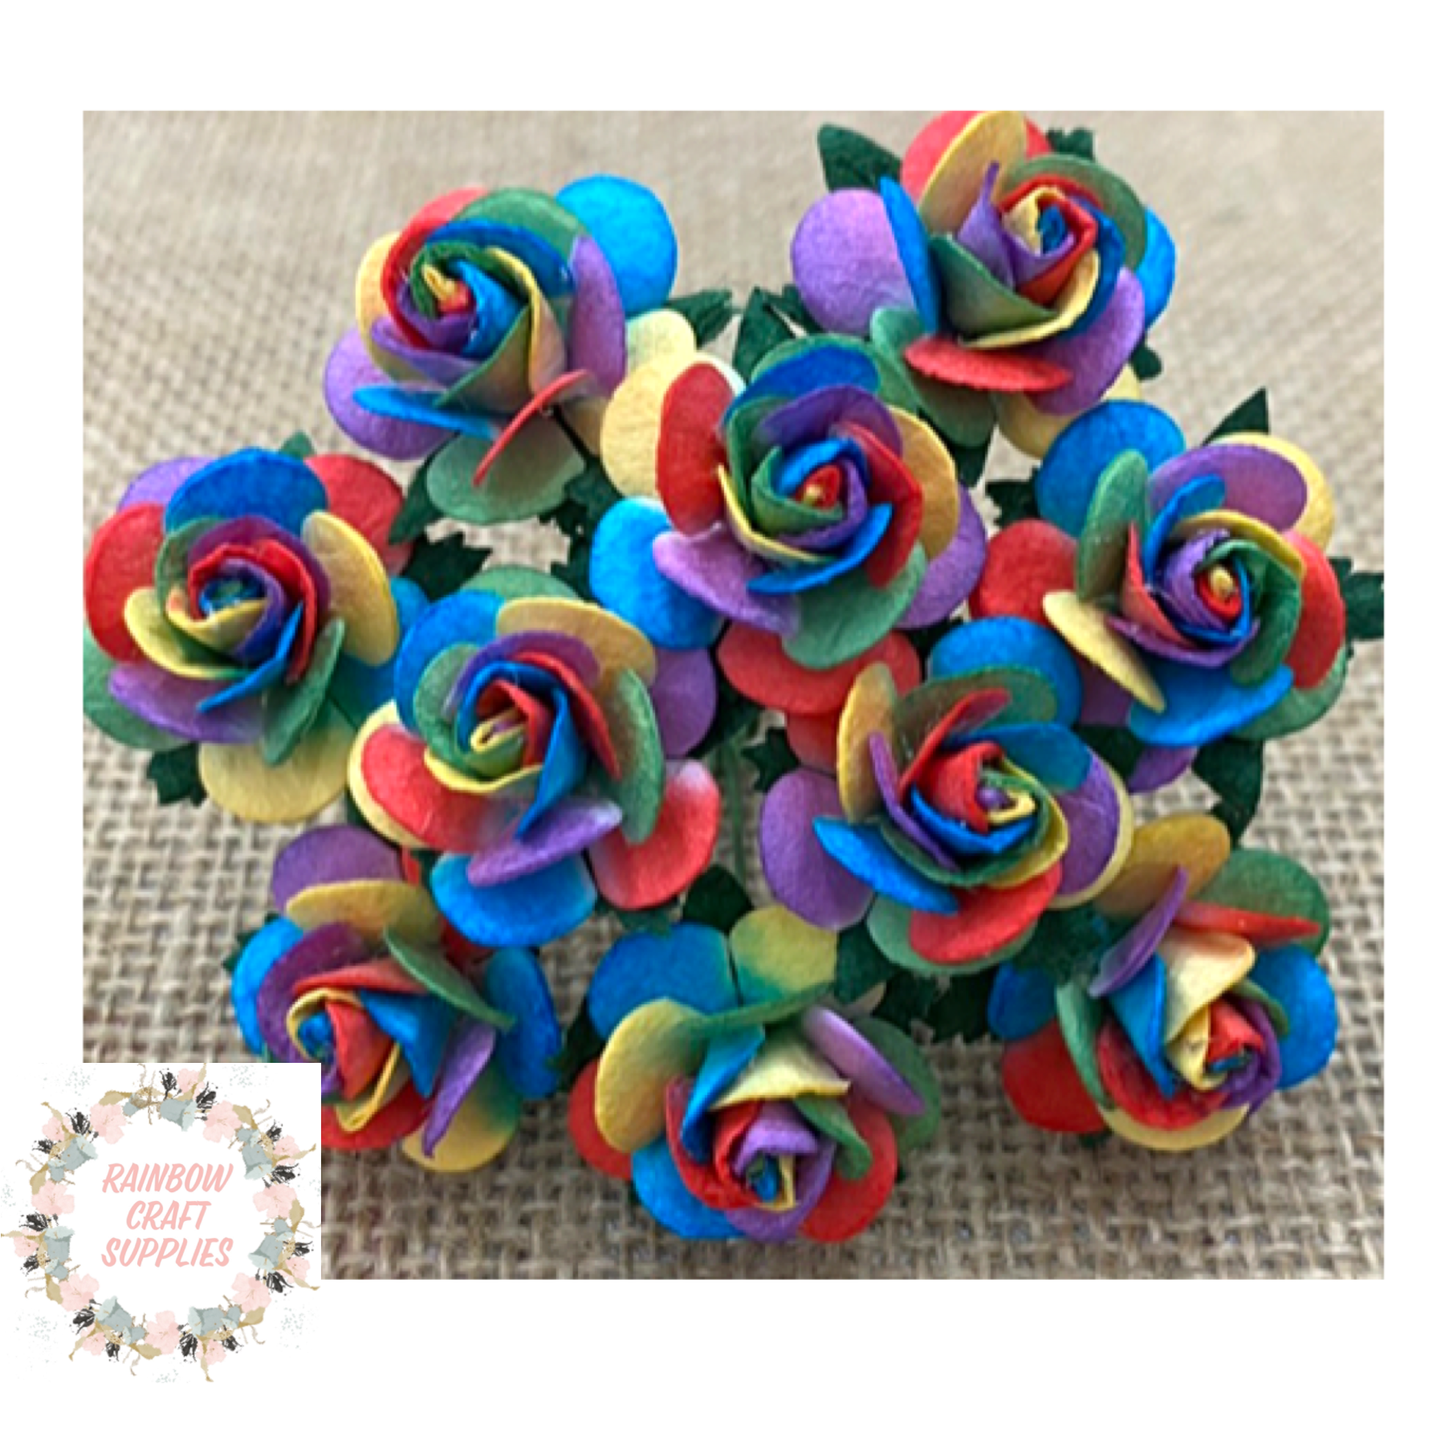 Mulberry open roses 15mm bright  rainbows x 10 heads